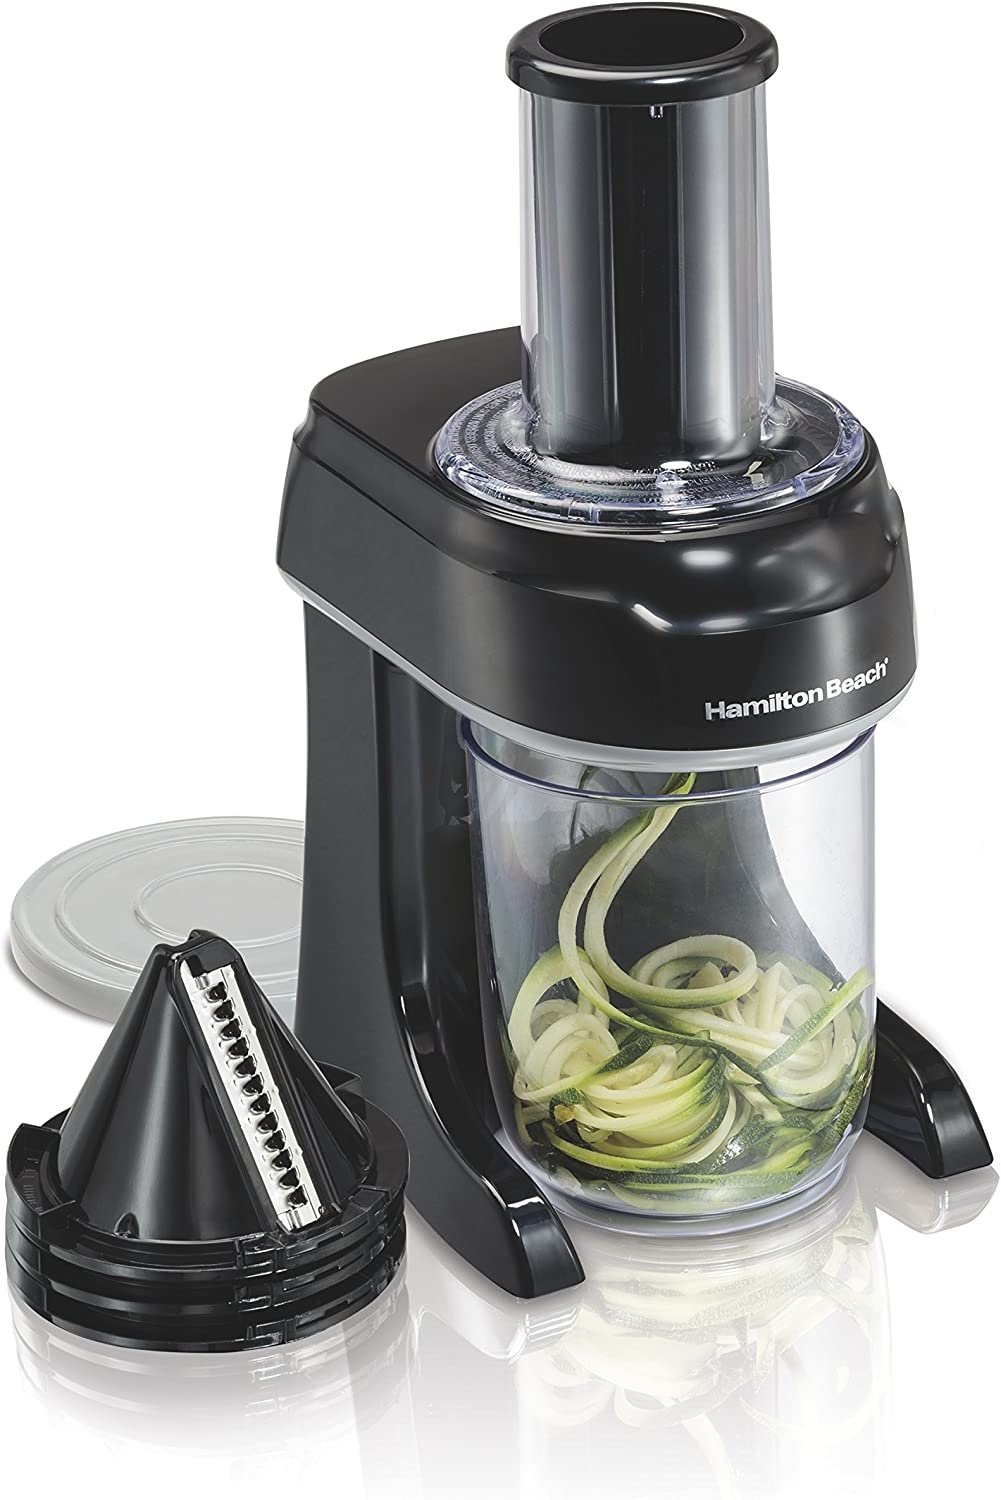 Hamilton Beach 3-in-1 Electric Vegetable Spiralizer & Slicer With 3 Cutting Cones for Veggie Spaghetti, Linguine, and Ribbons,